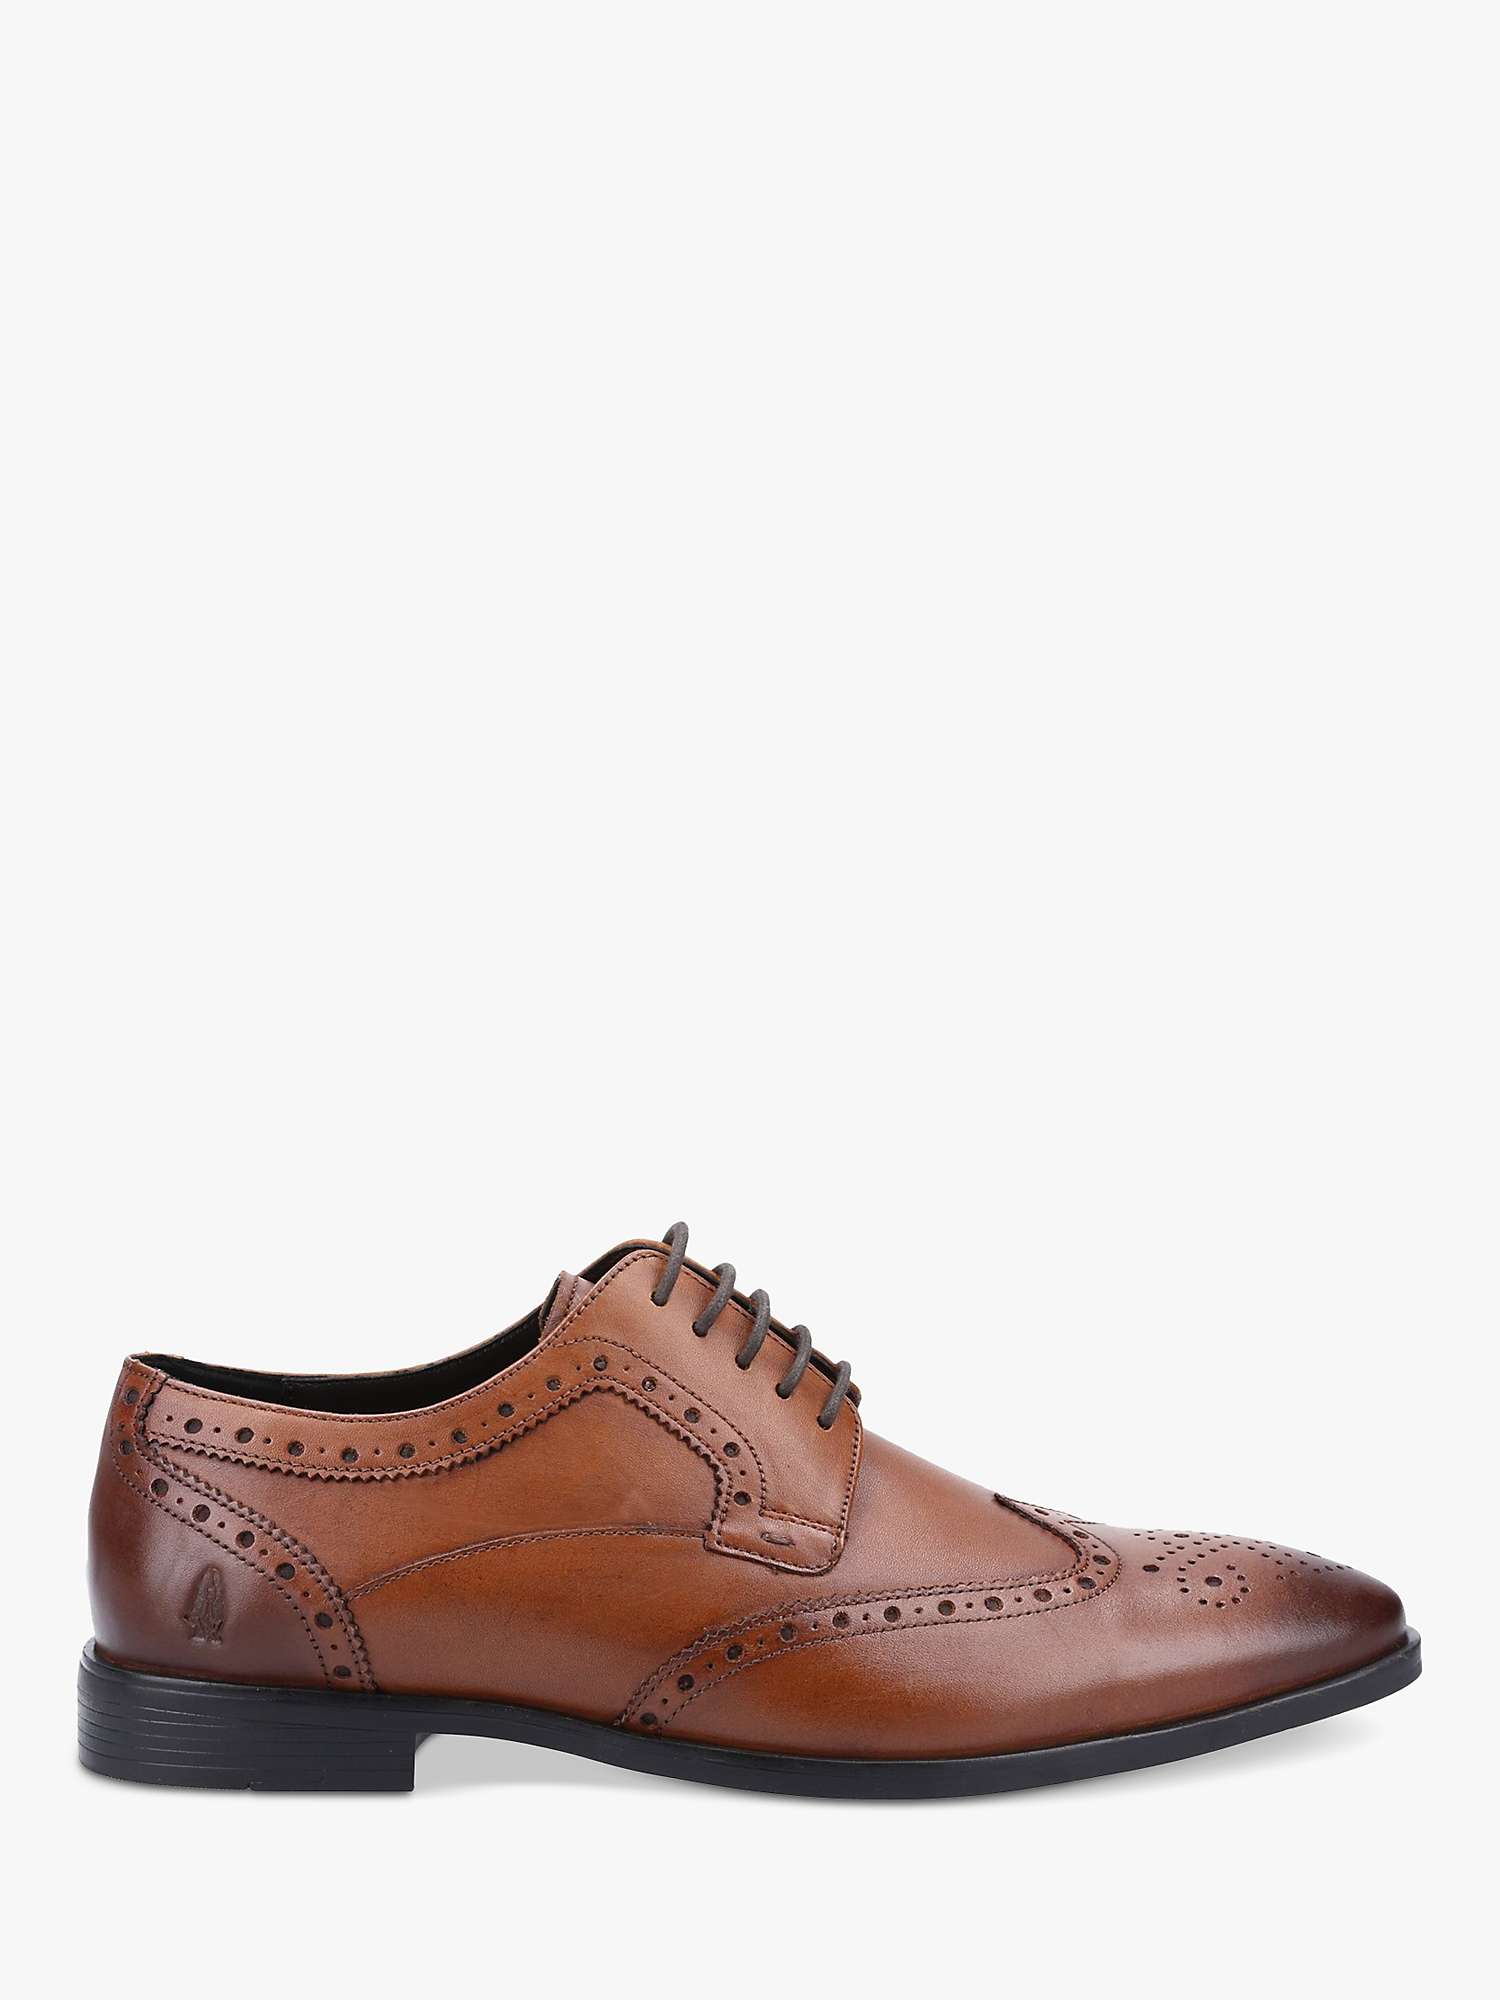 Buy Hush Puppies Elliot Brogue Leather Shoes Online at johnlewis.com